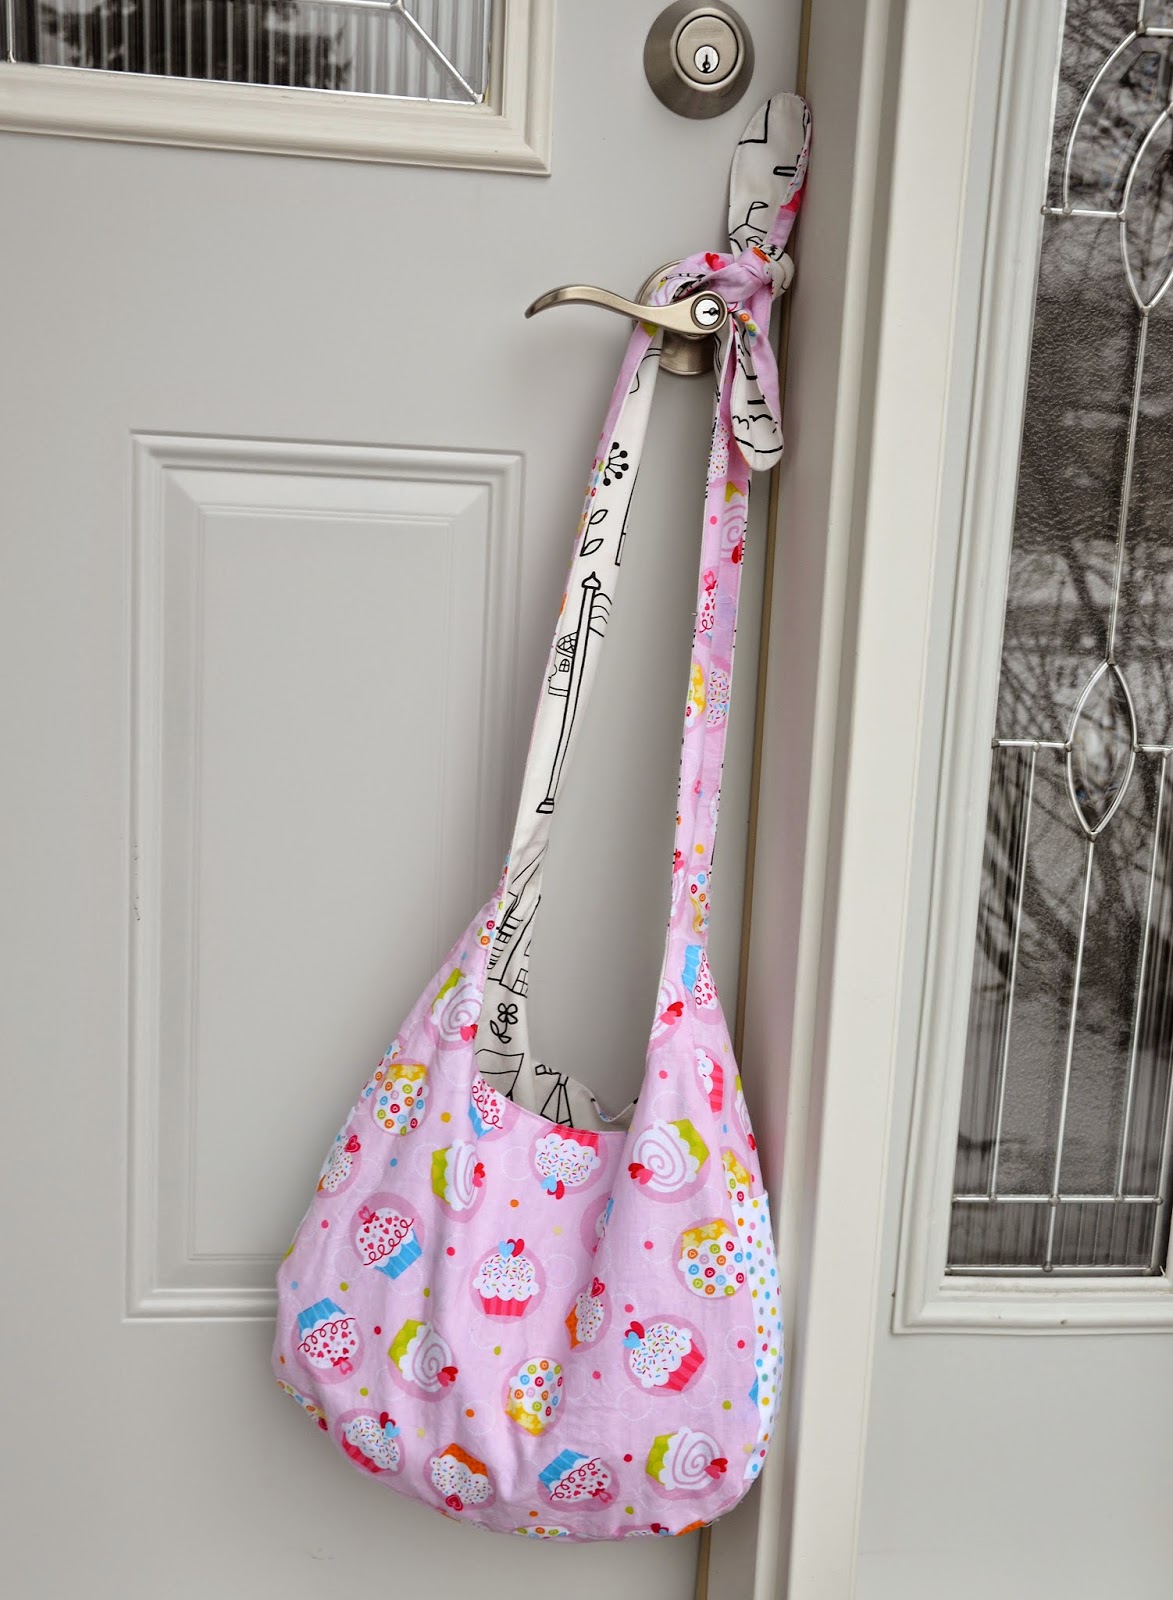 Slouchy bag pattern and tutorial download